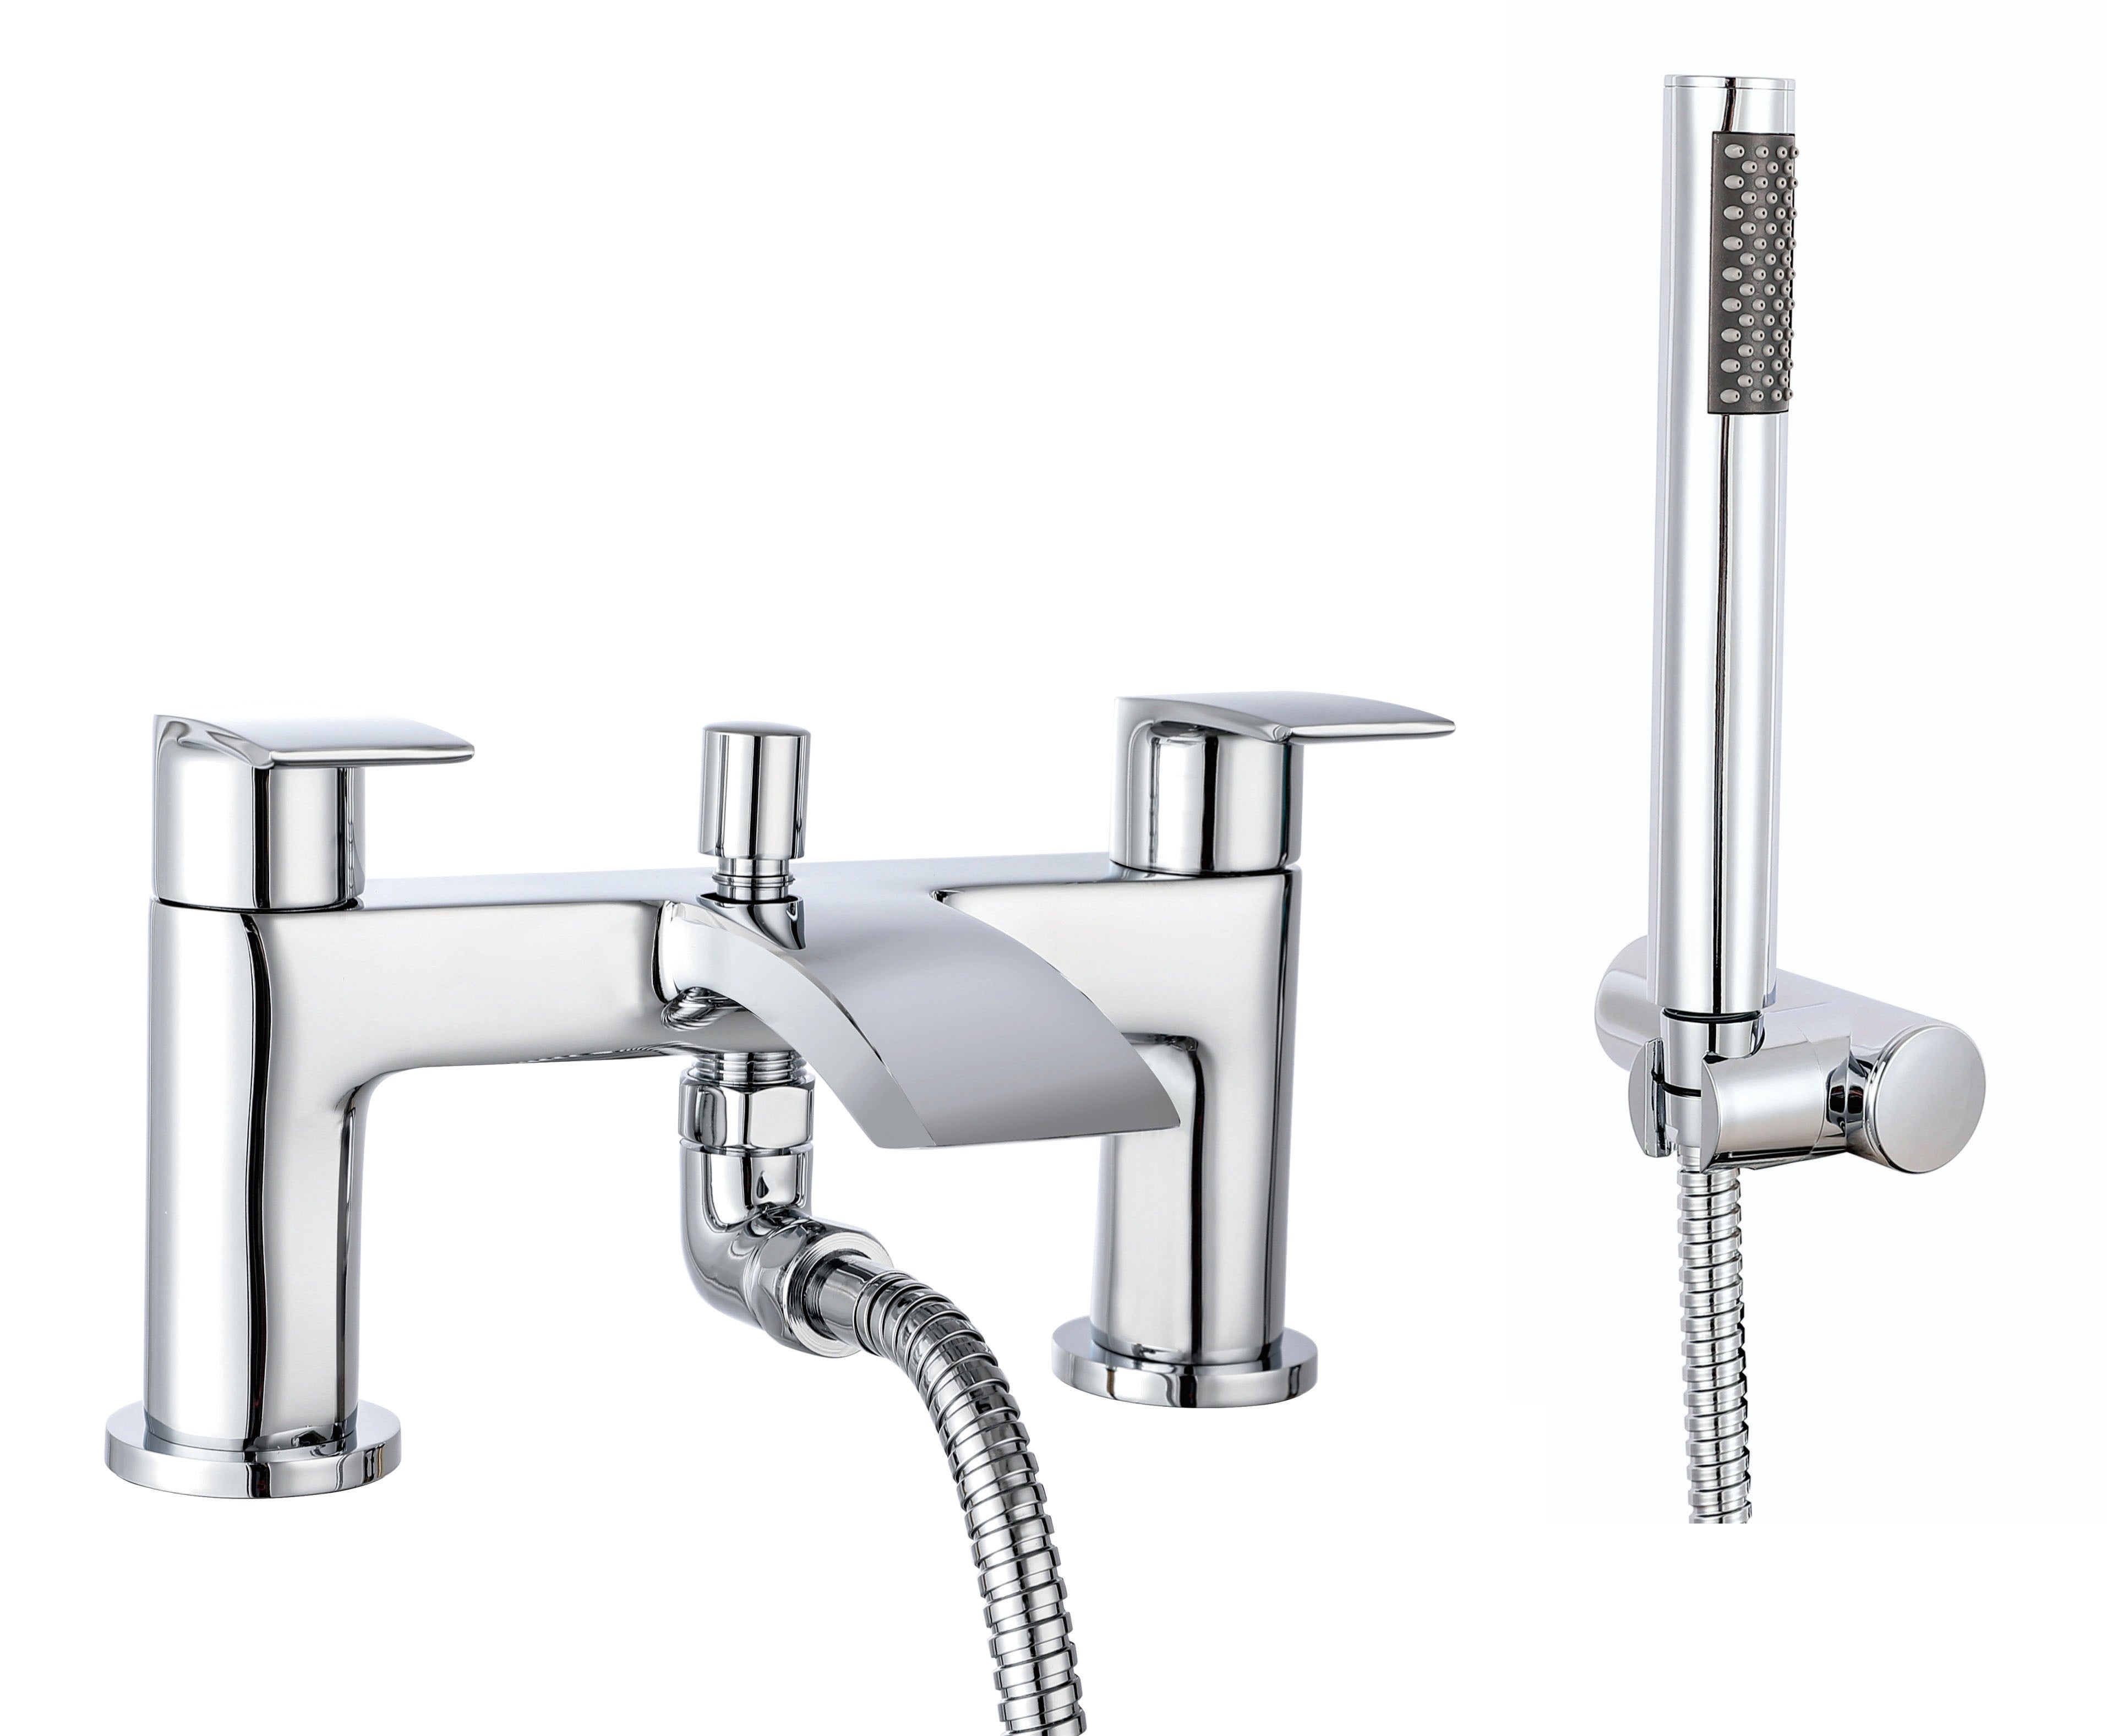 Modern Carter Bath Shower Mixer in Chrome finish, ideal for contemporary bathrooms. Includes easy-to-use controls and sleek design. Available at Bathroom4Less, perfect for UK homes seeking style and functionality.